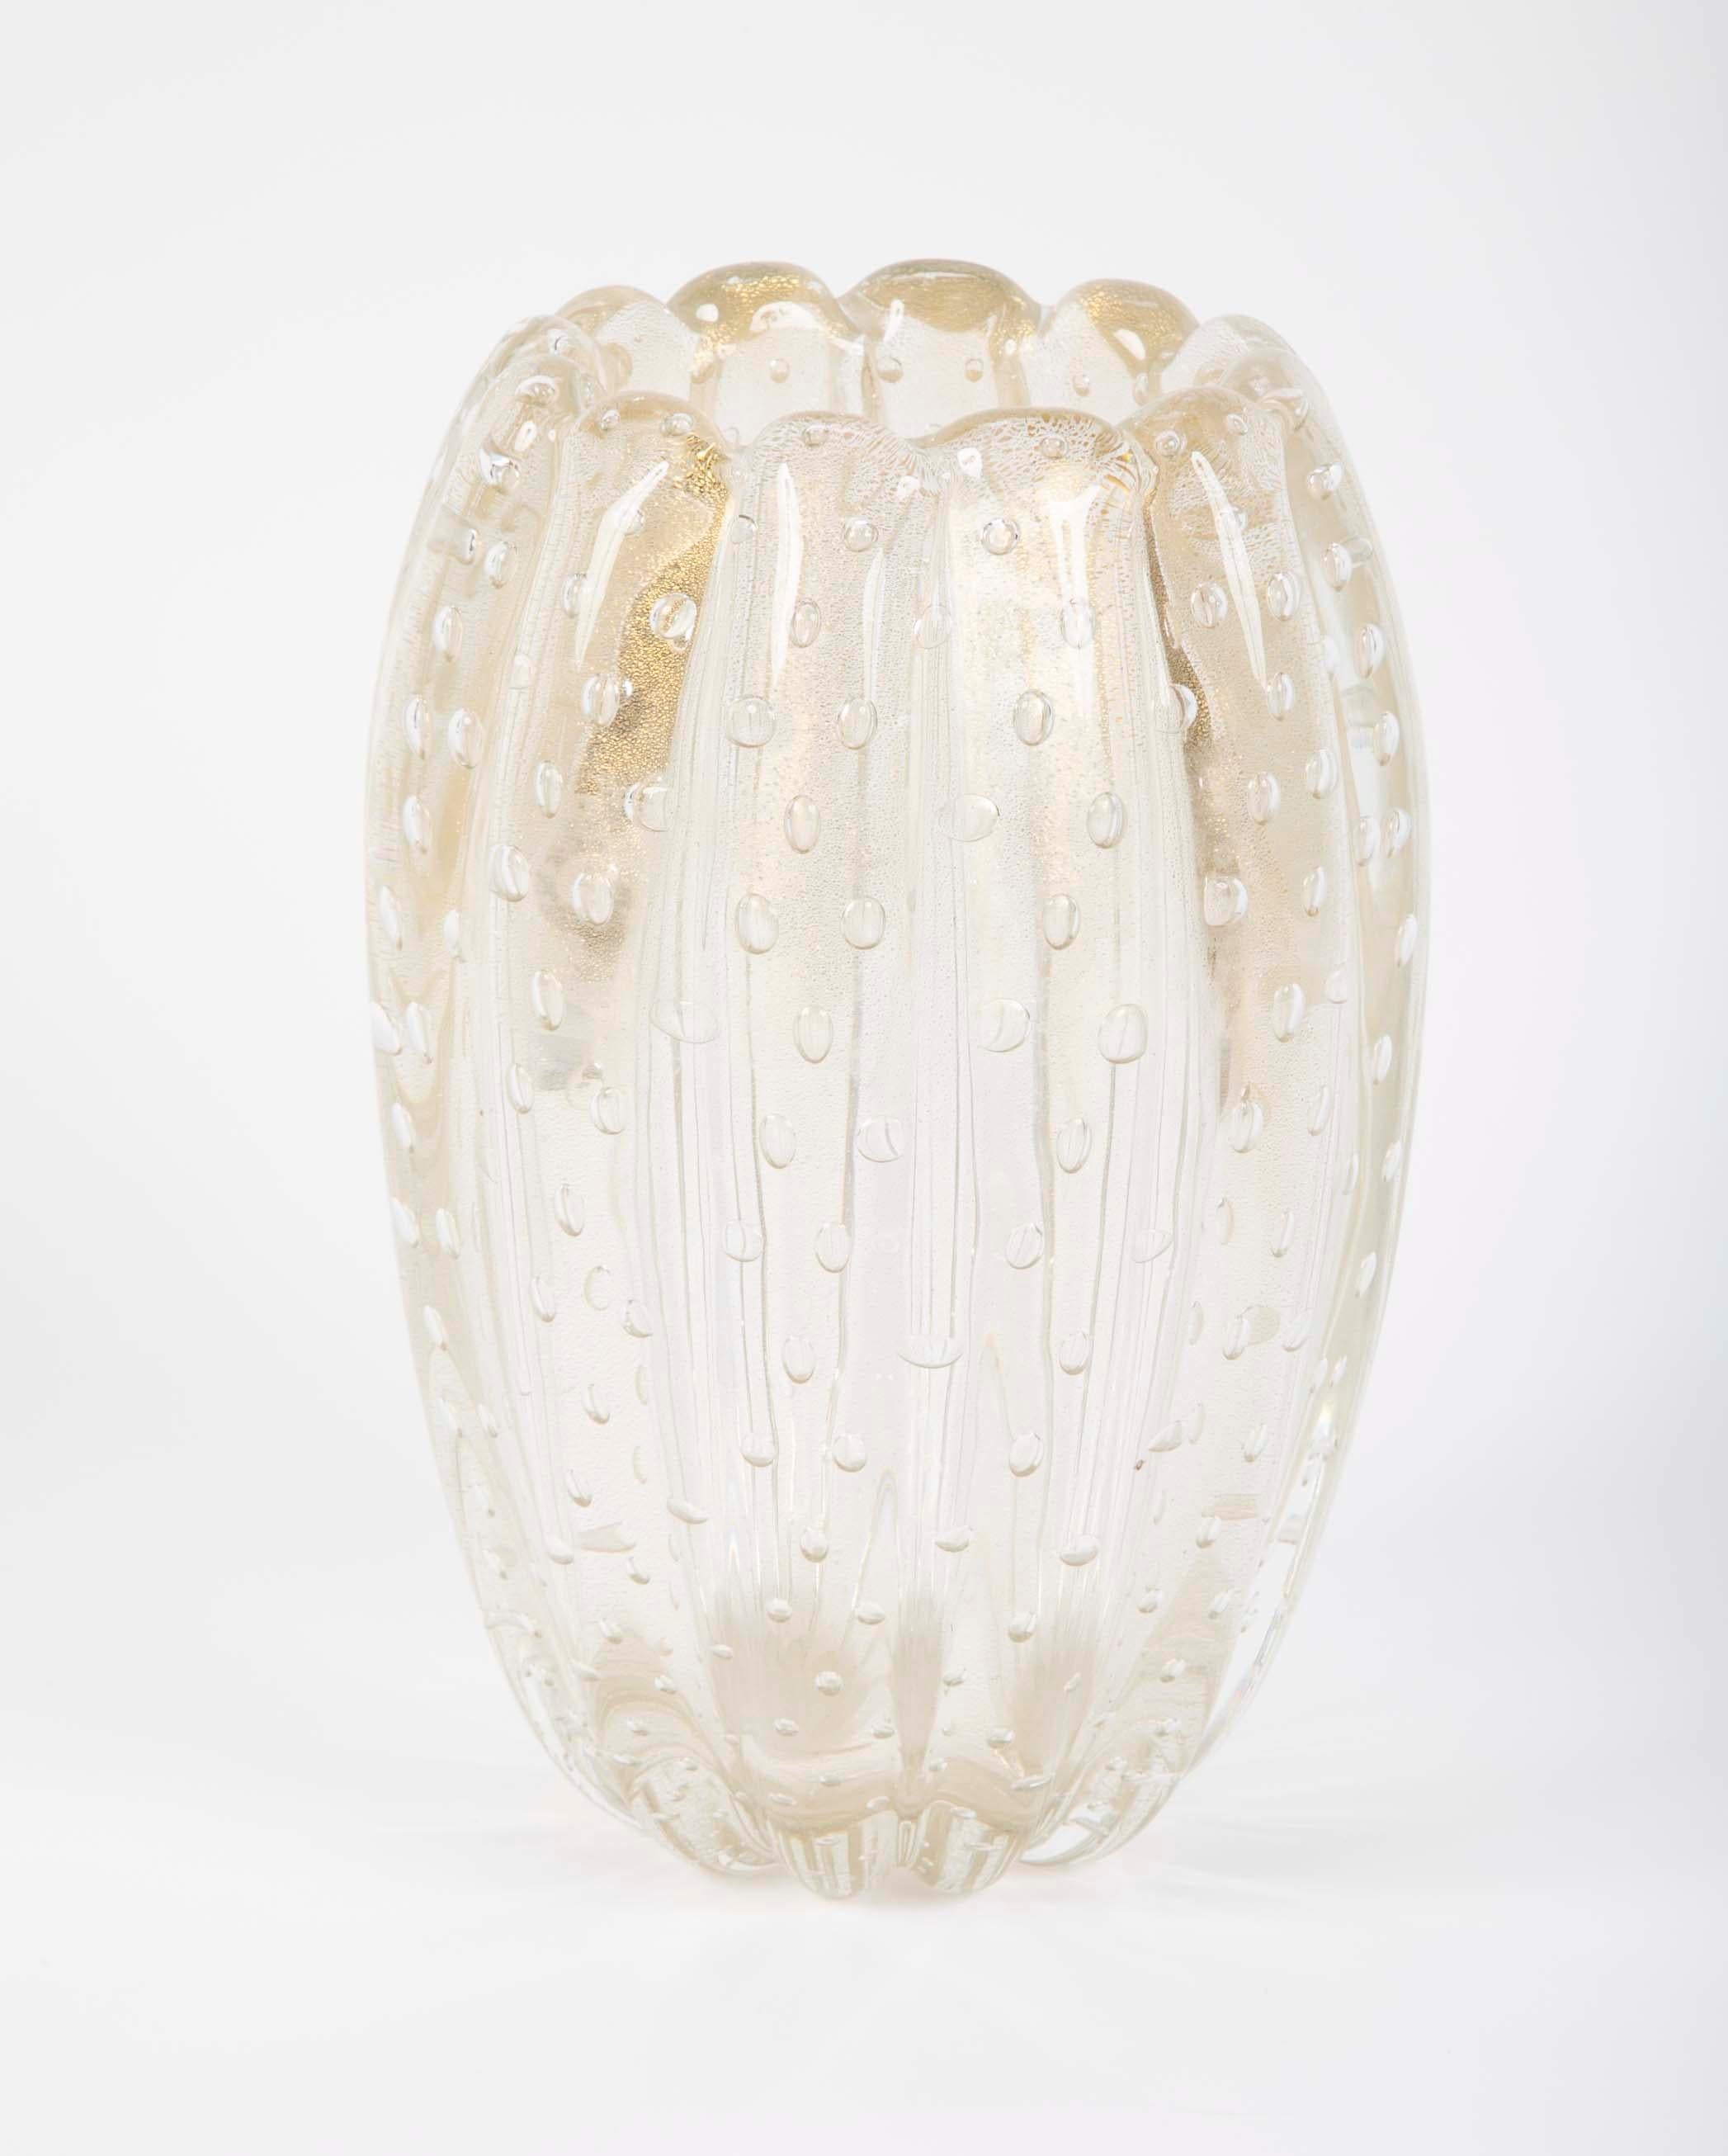 A large gold fluted glass vase with bubbles designed by Ercole Barovier for Barovier & Toso.